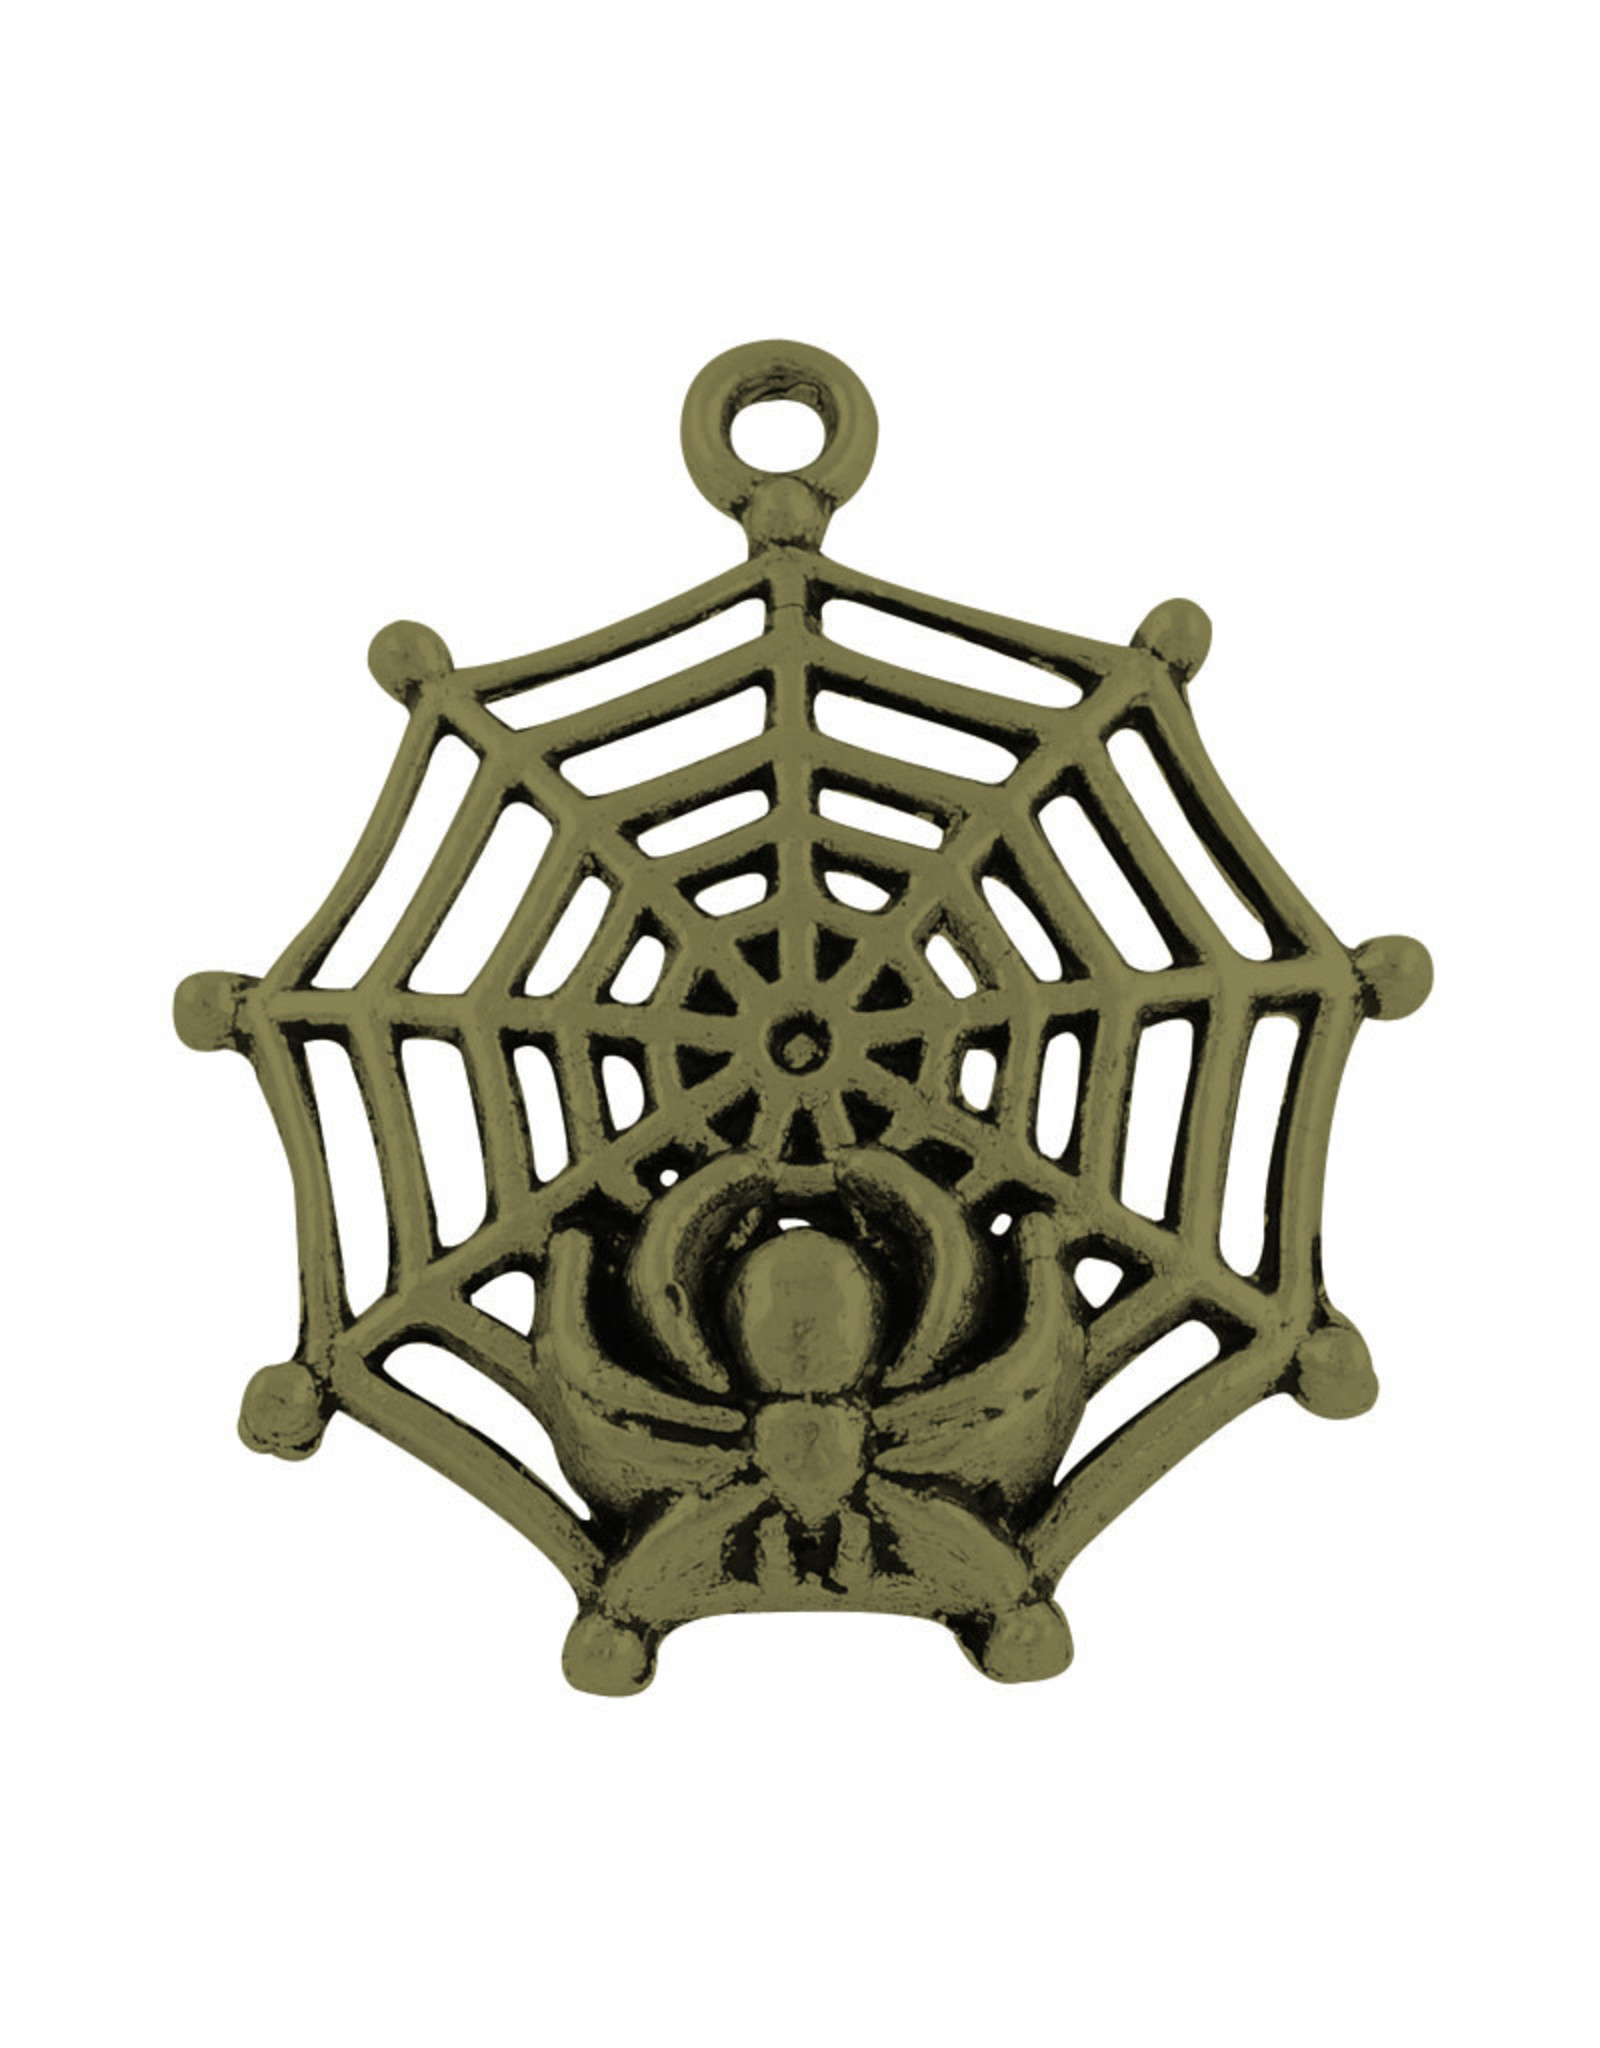 Spider and Web  31x27x6mm  Antique Bronze   x24  NF